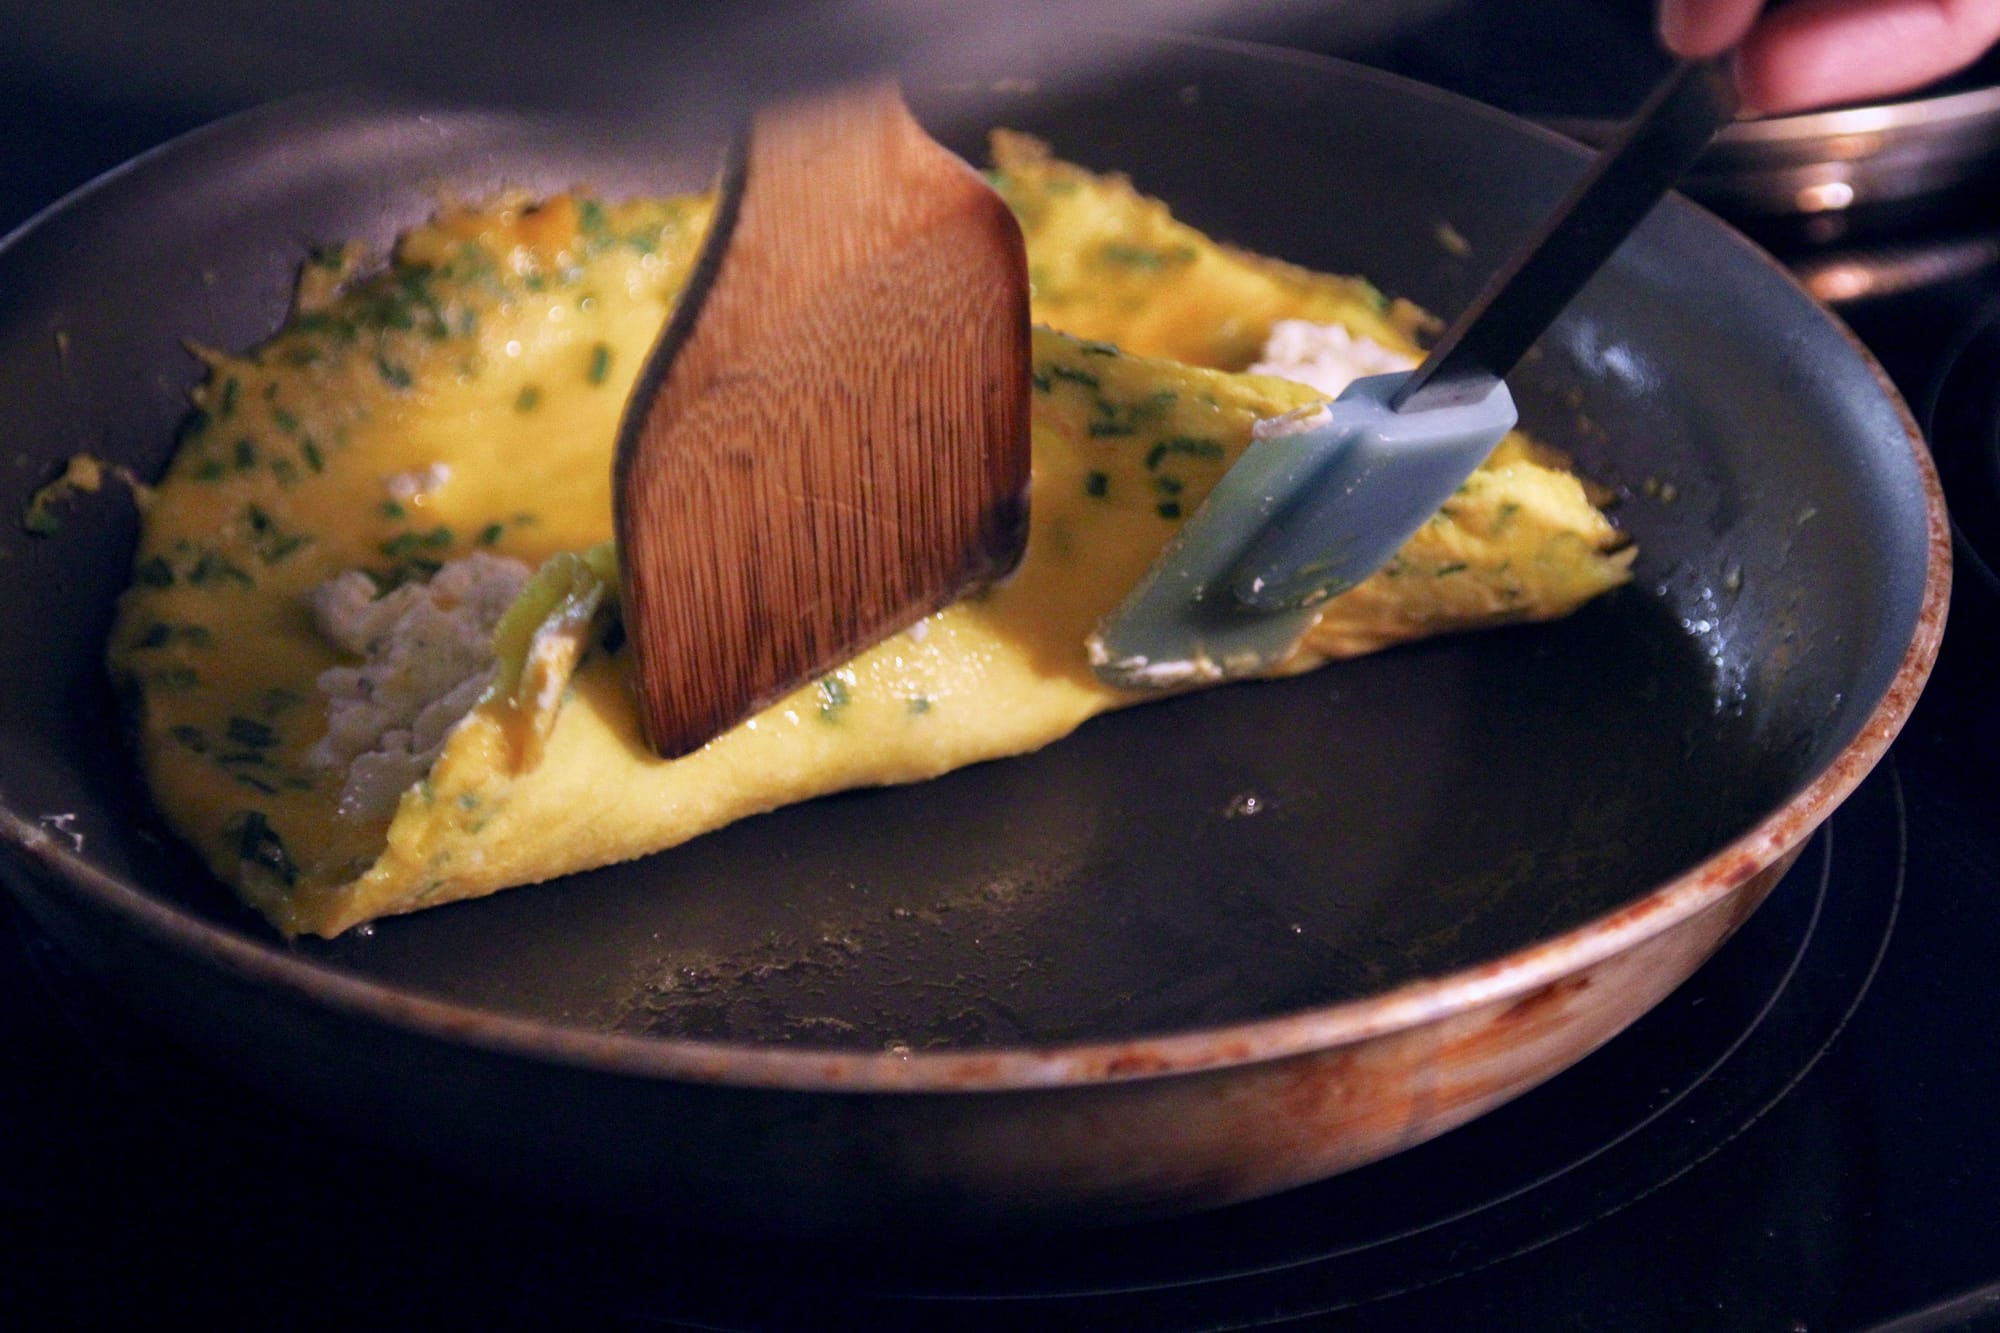 Folding one third of the french omelette.